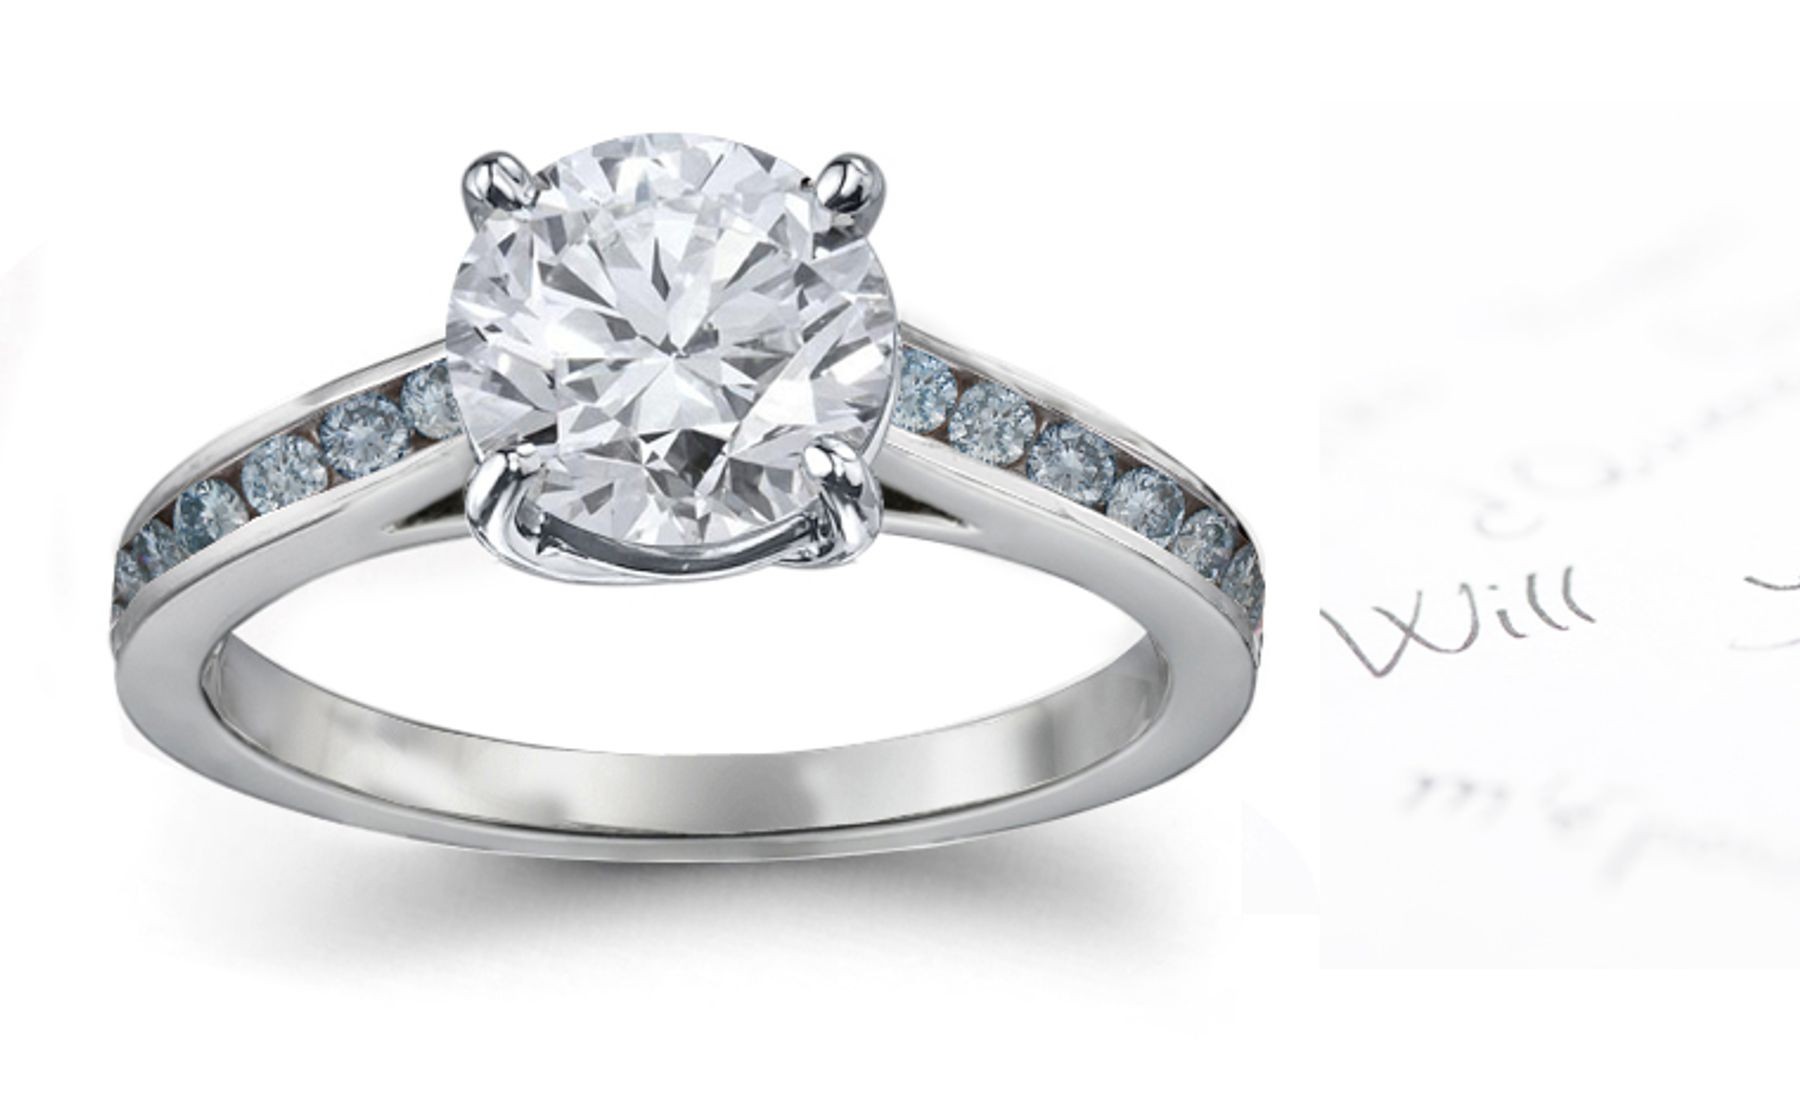 Blue & White Diamond Engagement Rings Premier Collection